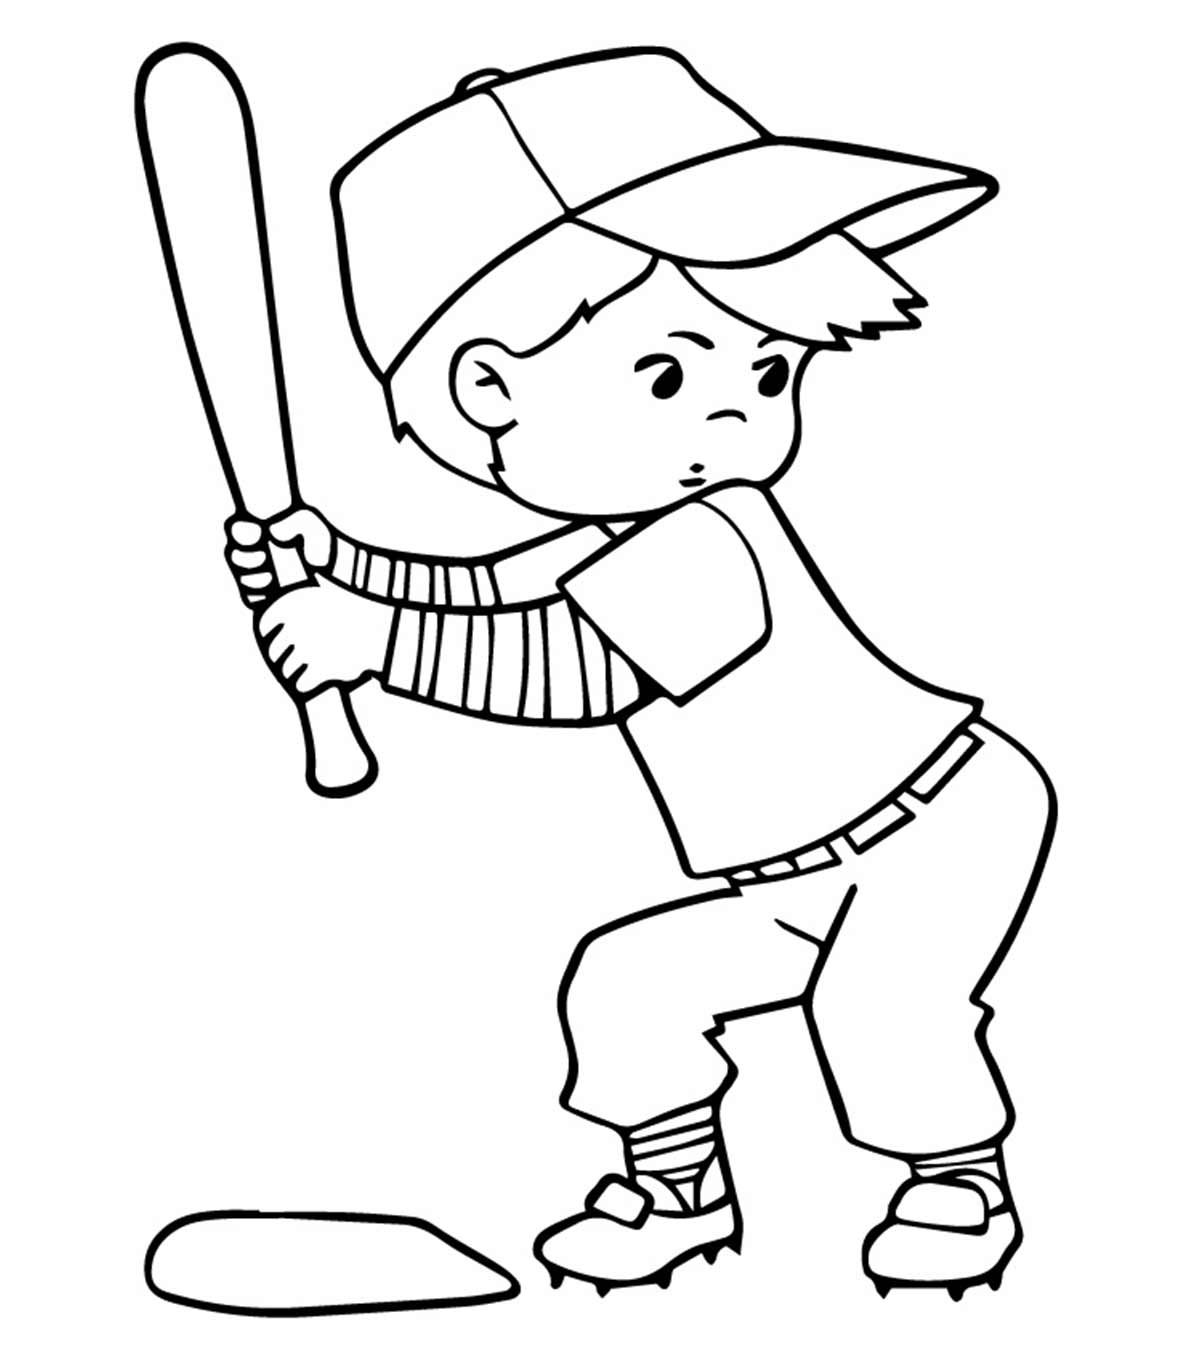 Top 20 Baseball Coloring Pages For Toddlers